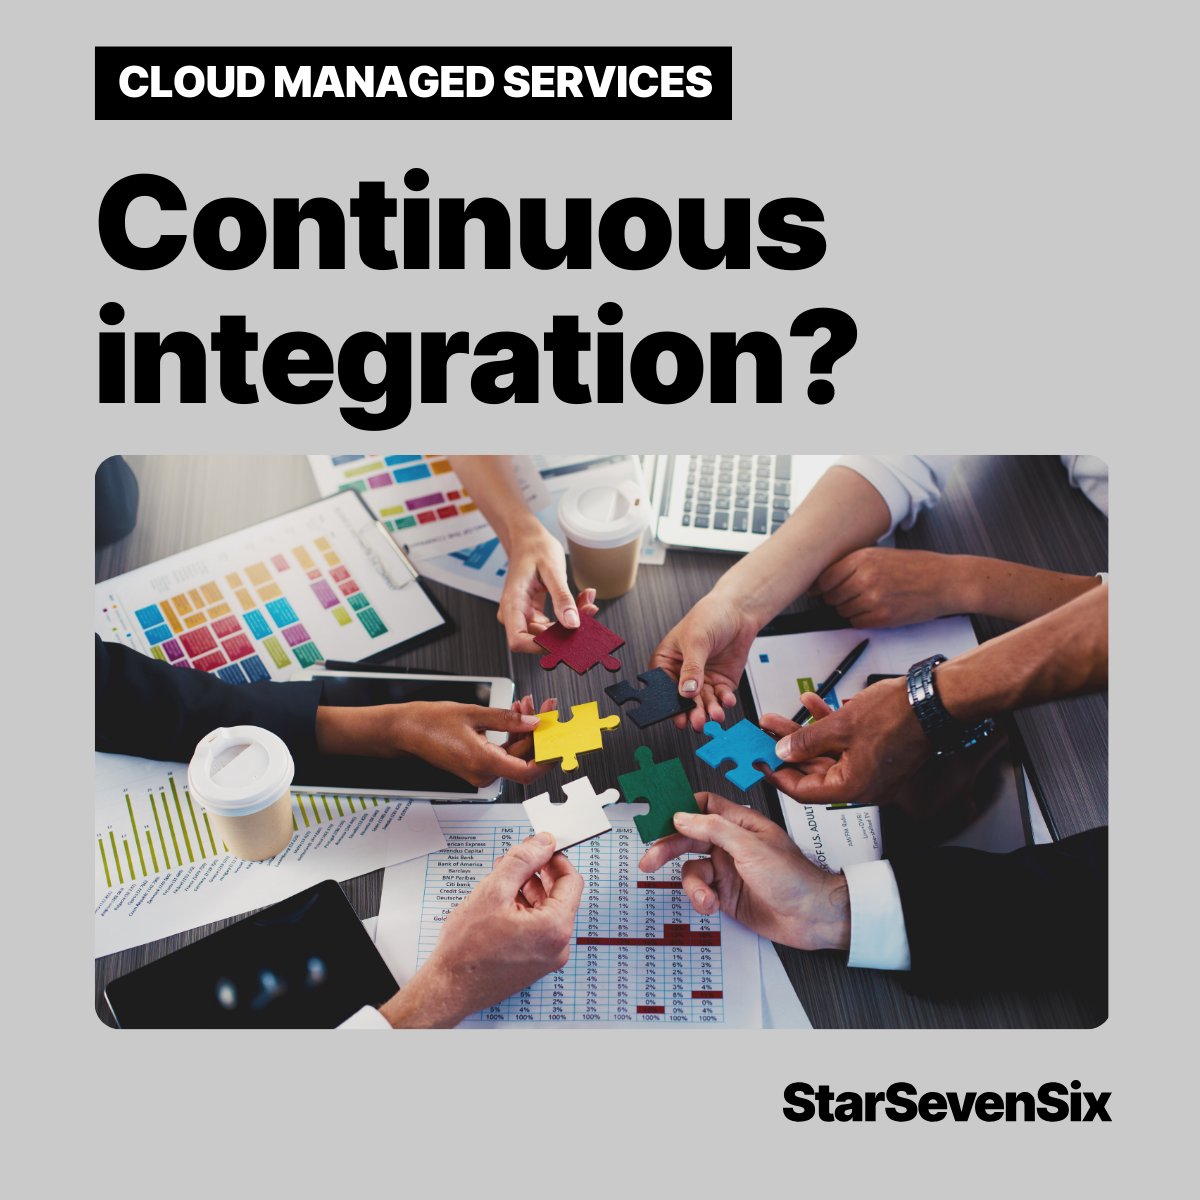 Keep your development engine running smoothly with our Cloud Managed Services. 🏎️ 

Discover how we make continuous integration a breeze. 

More details: starsevensix.com/services/manag…

#ContinuousIntegration #DevOps #AgileDevelopment #SoftwareDevelopment #TechSolutions